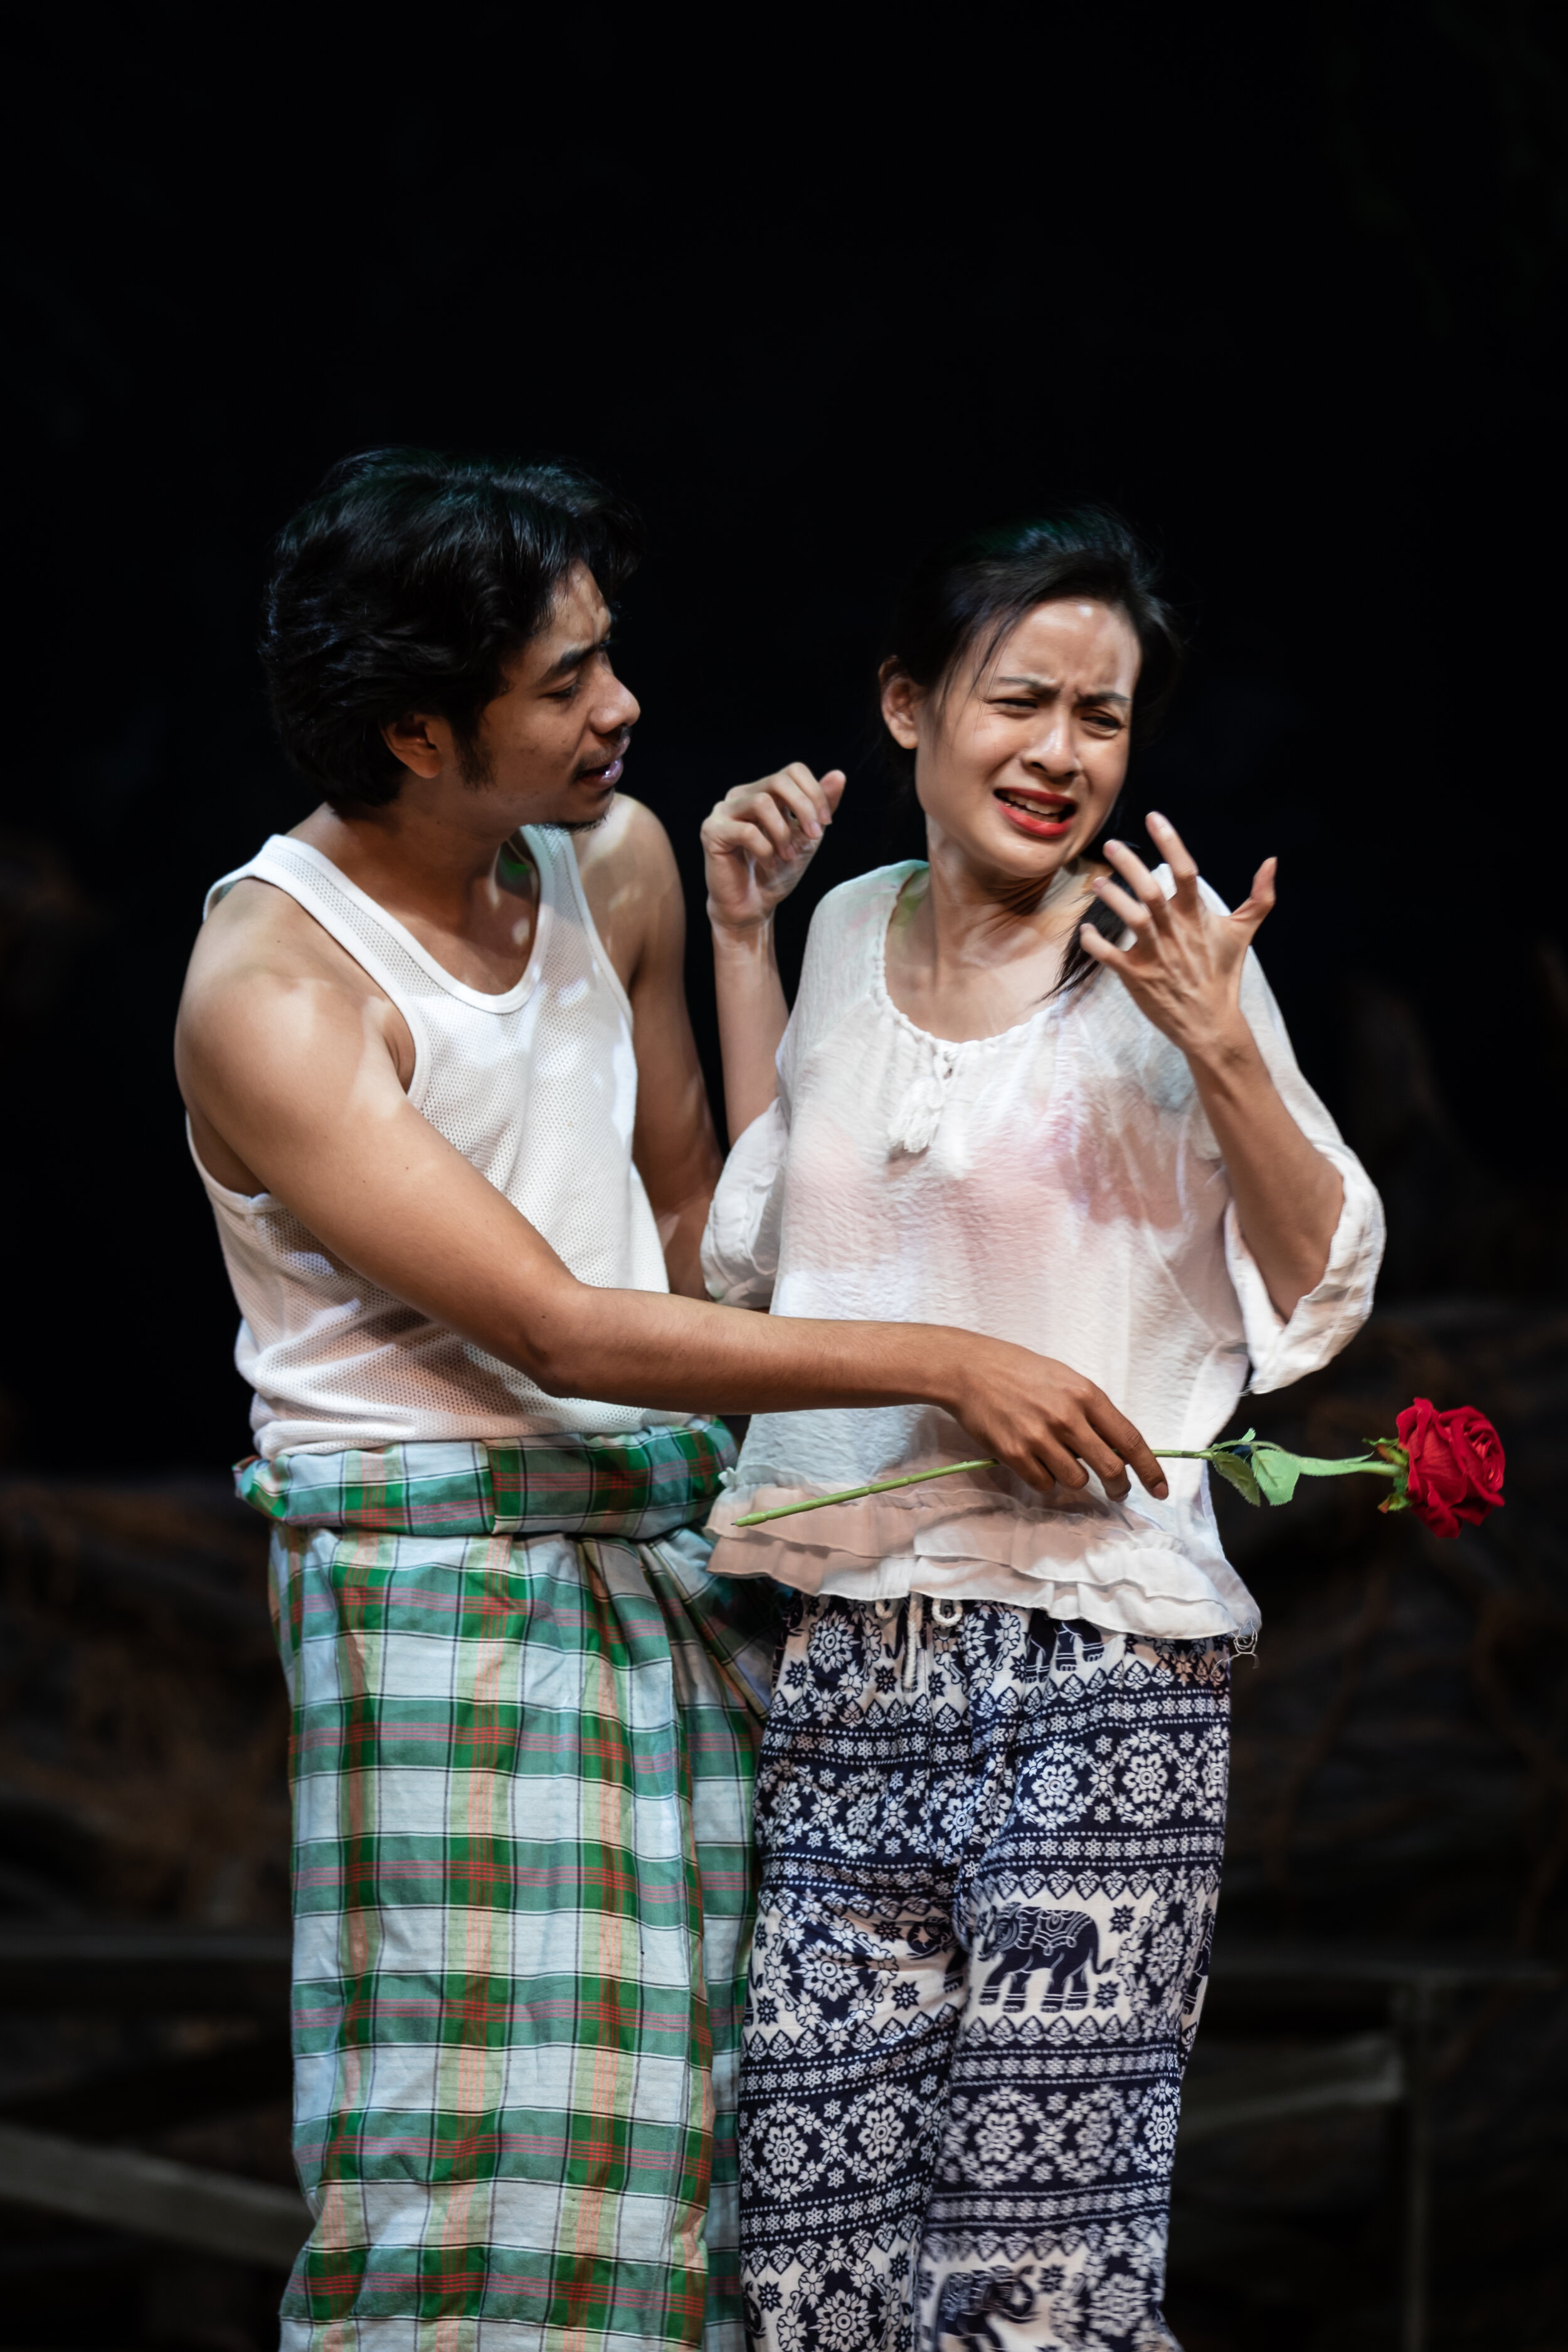    As You Like It , 2019   Writer: William Shakespeare  Director: Michael Earley  Photo Credit: Bernie Ng 